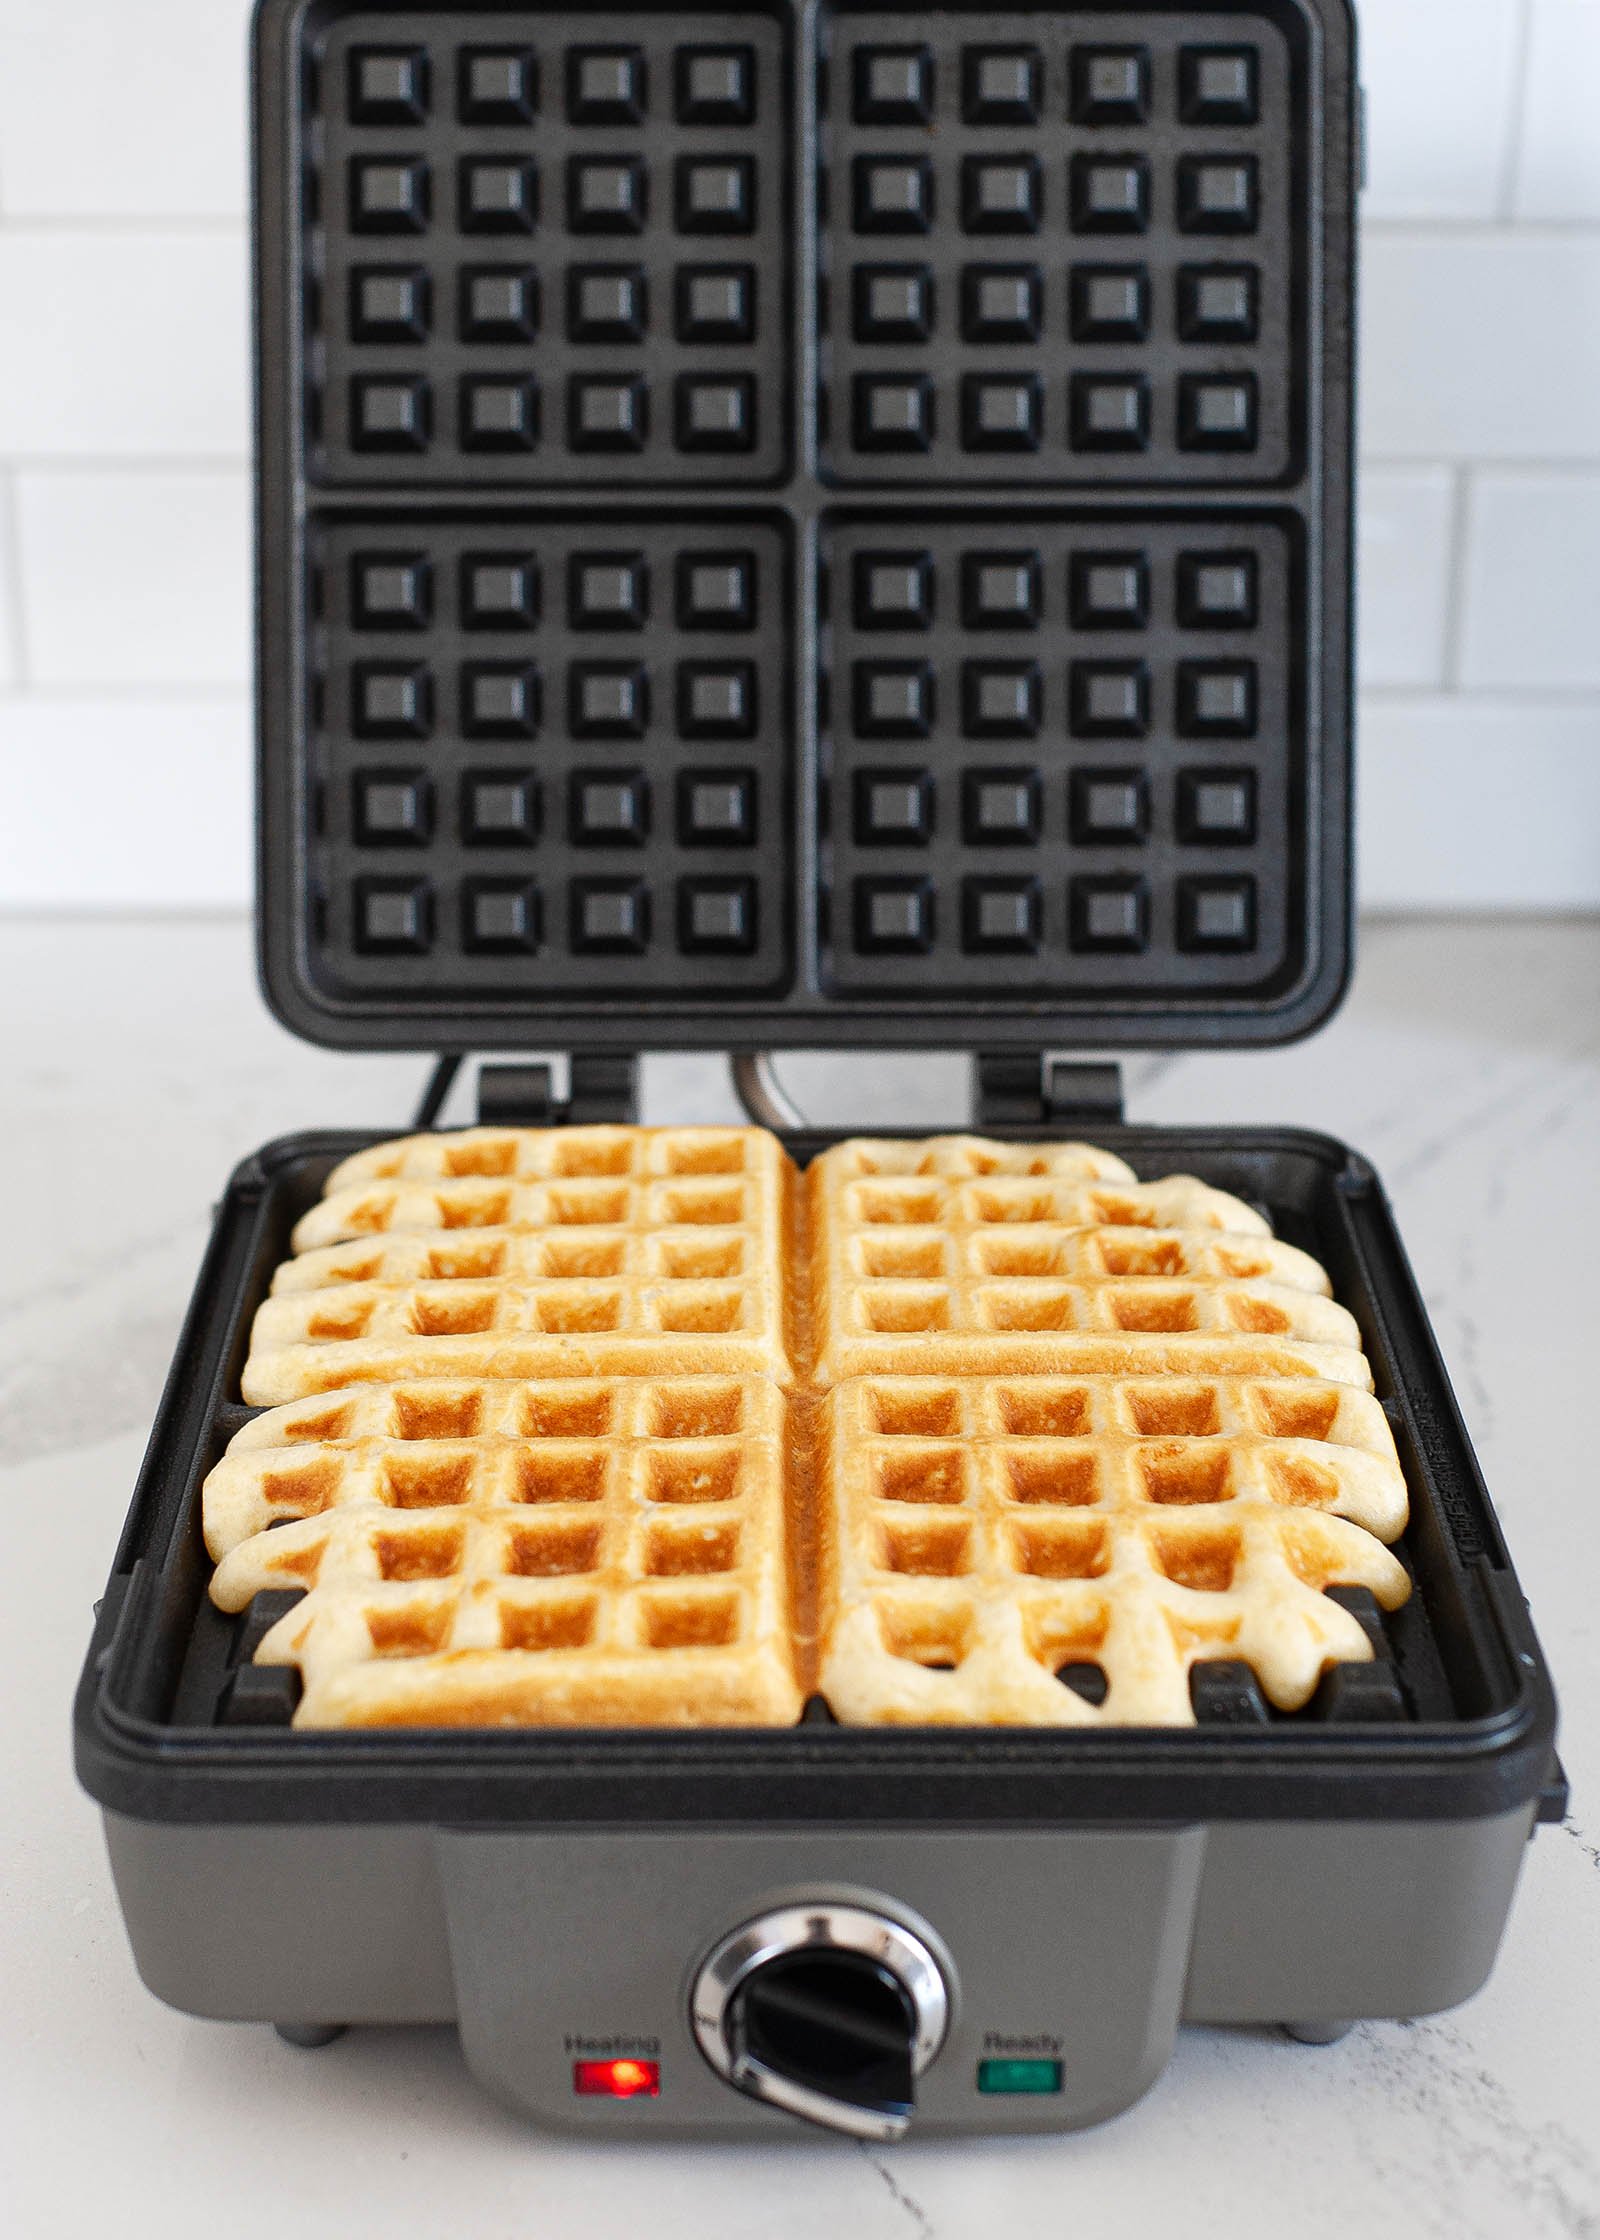 An open waffle maker with a cooked waffle inside.